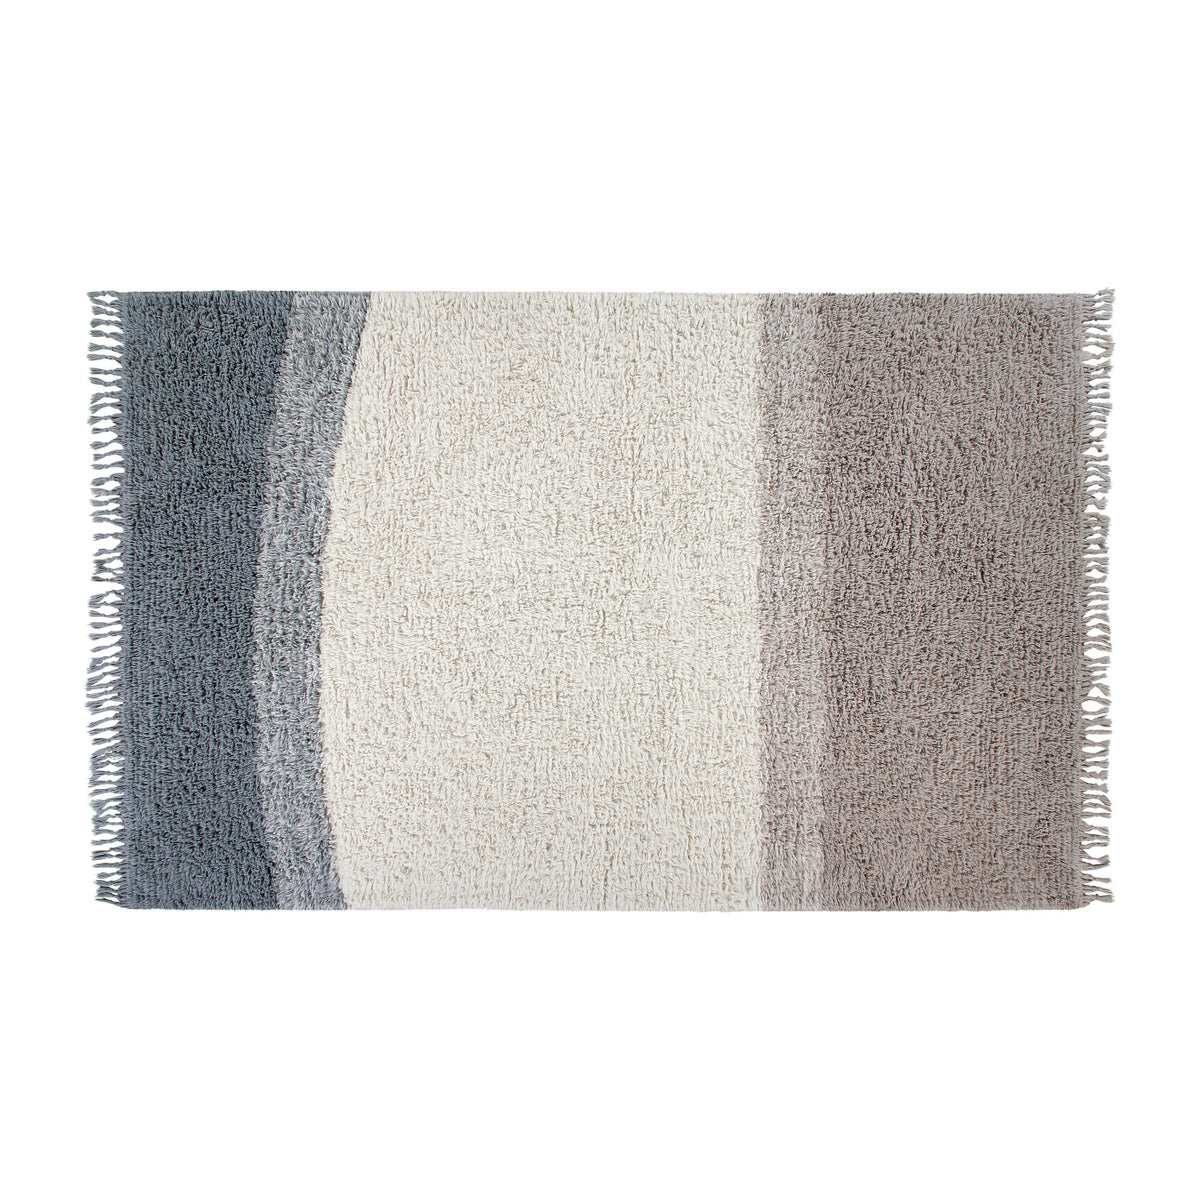 Into the Blue Woolable Rug - Smoke Blue Multi